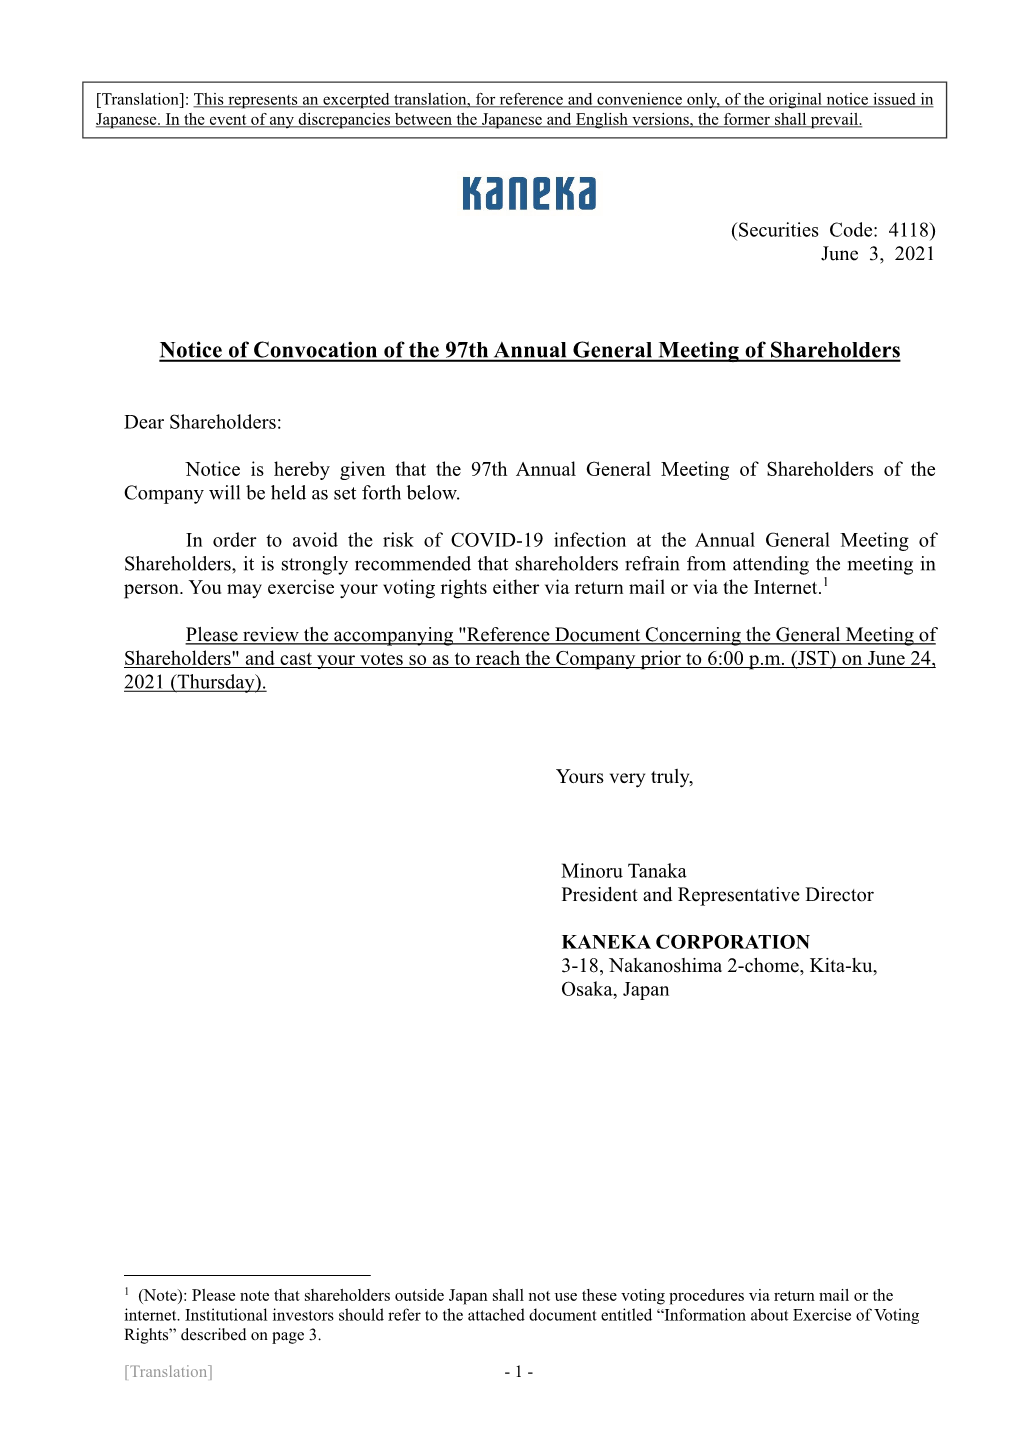 Notice of Convocation of the 97Th Annual General Meeting of Shareholders